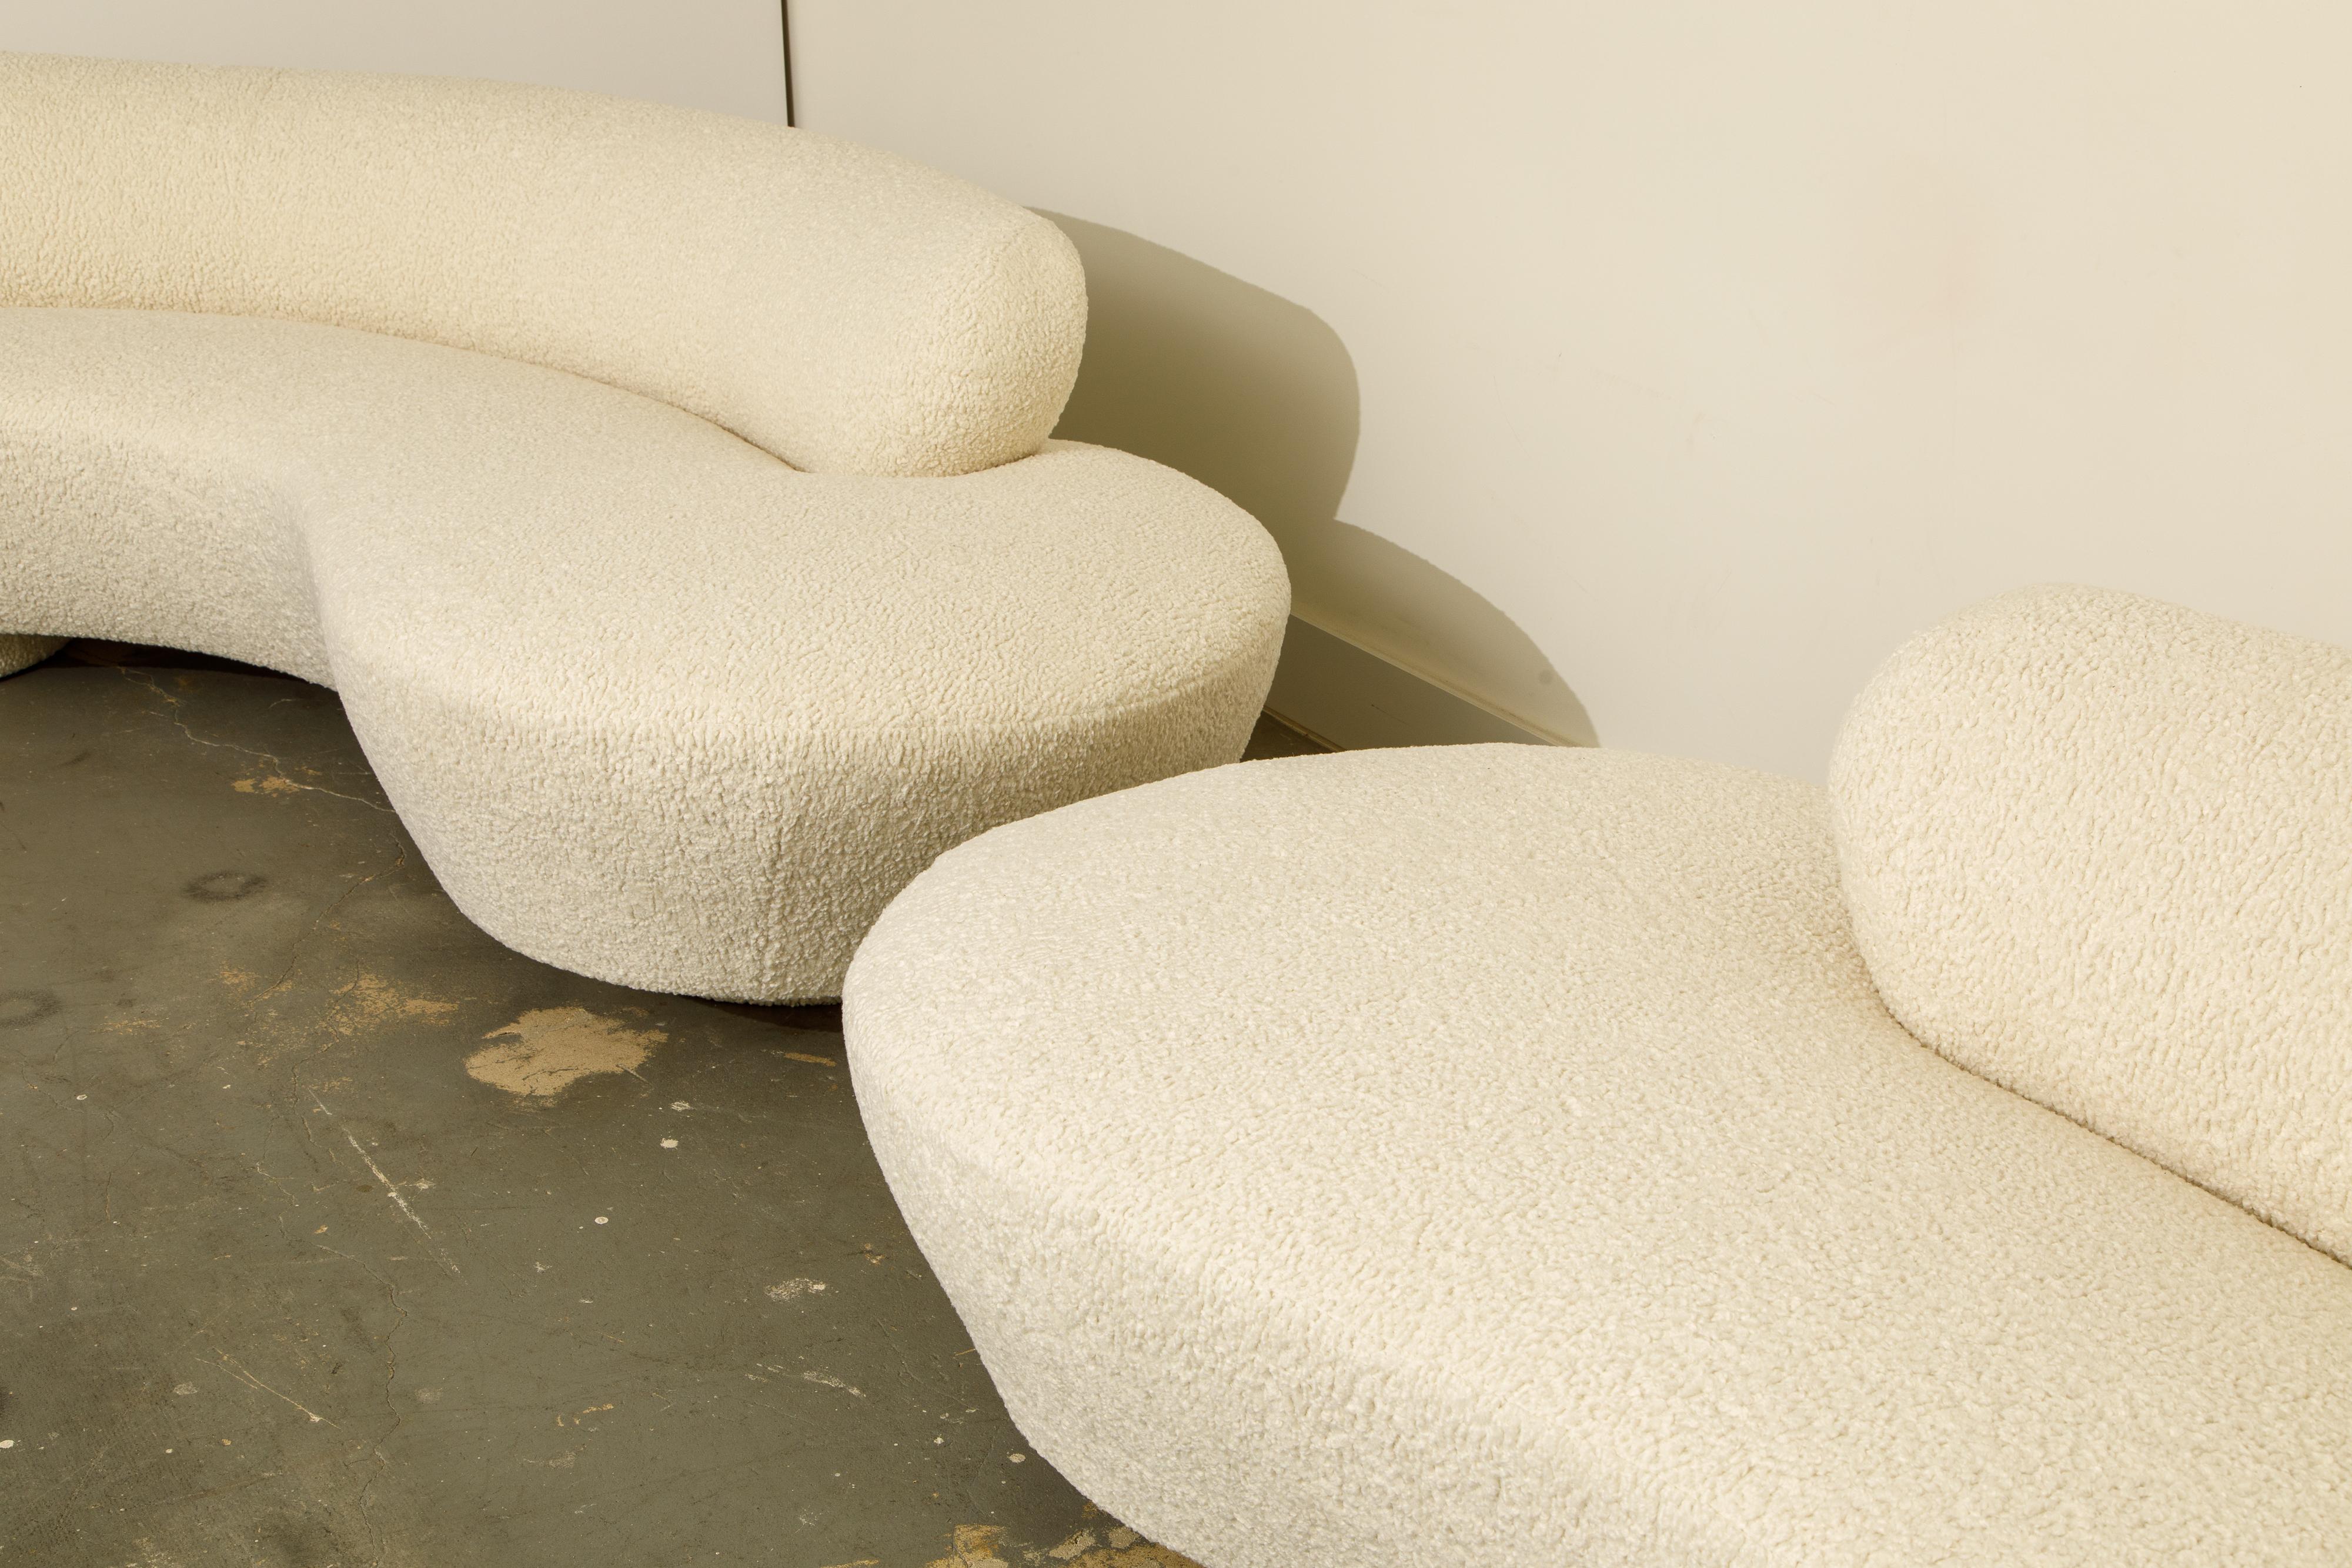 American Vladimir Kagan for Directional 'Cloud' Sofas in New Nubby Bouclé, c 1980, Signed